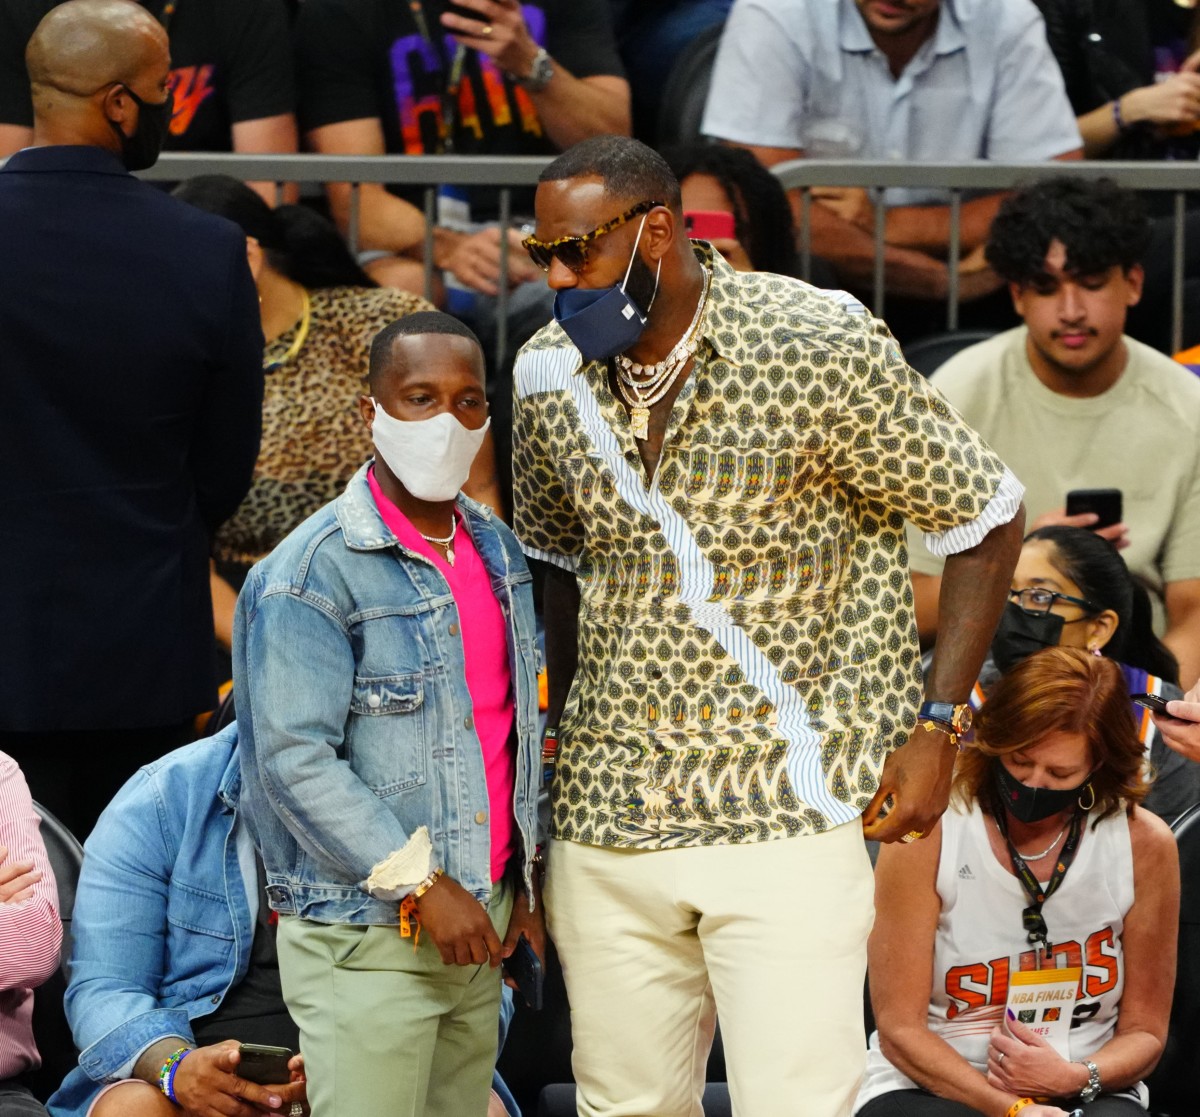 Los Angeles Lakers player LeBron James (right) with agent Rich Paul during game five of the 2021 NBA Finals. [Photo cropped so dimensions fit page]